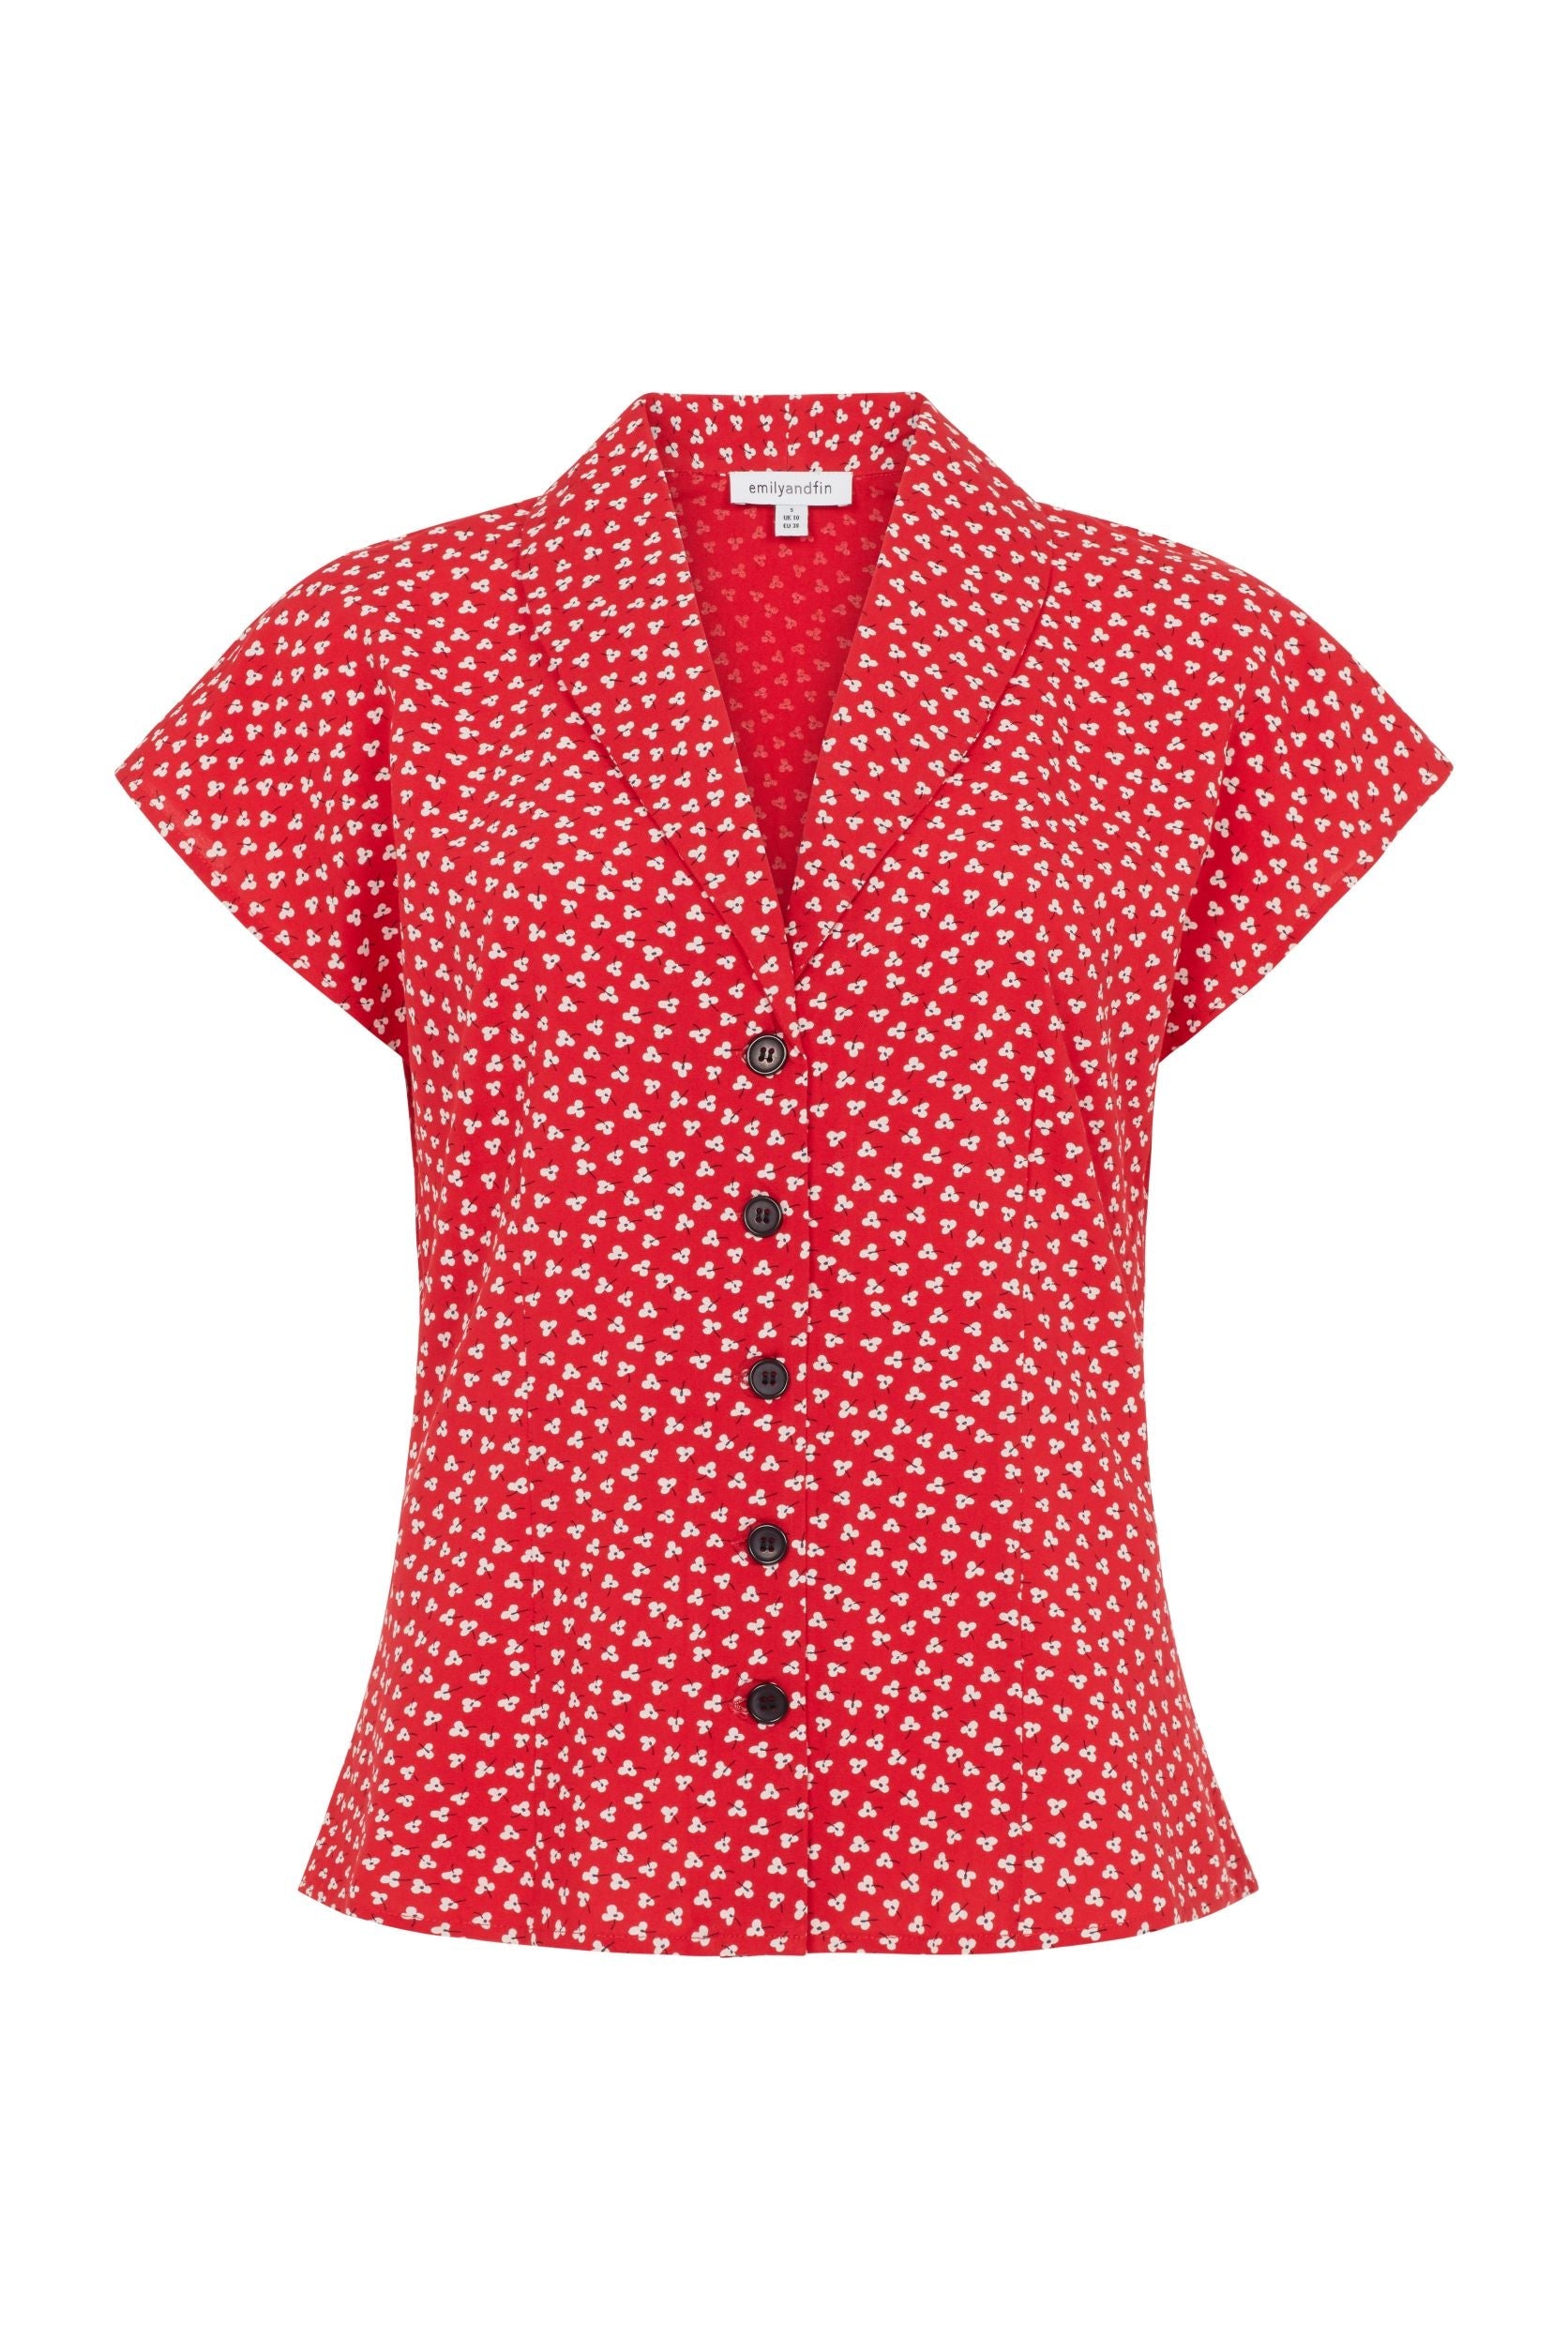 Emily & Fin Evie Blouse Red Ditsy Floral - BouChic 